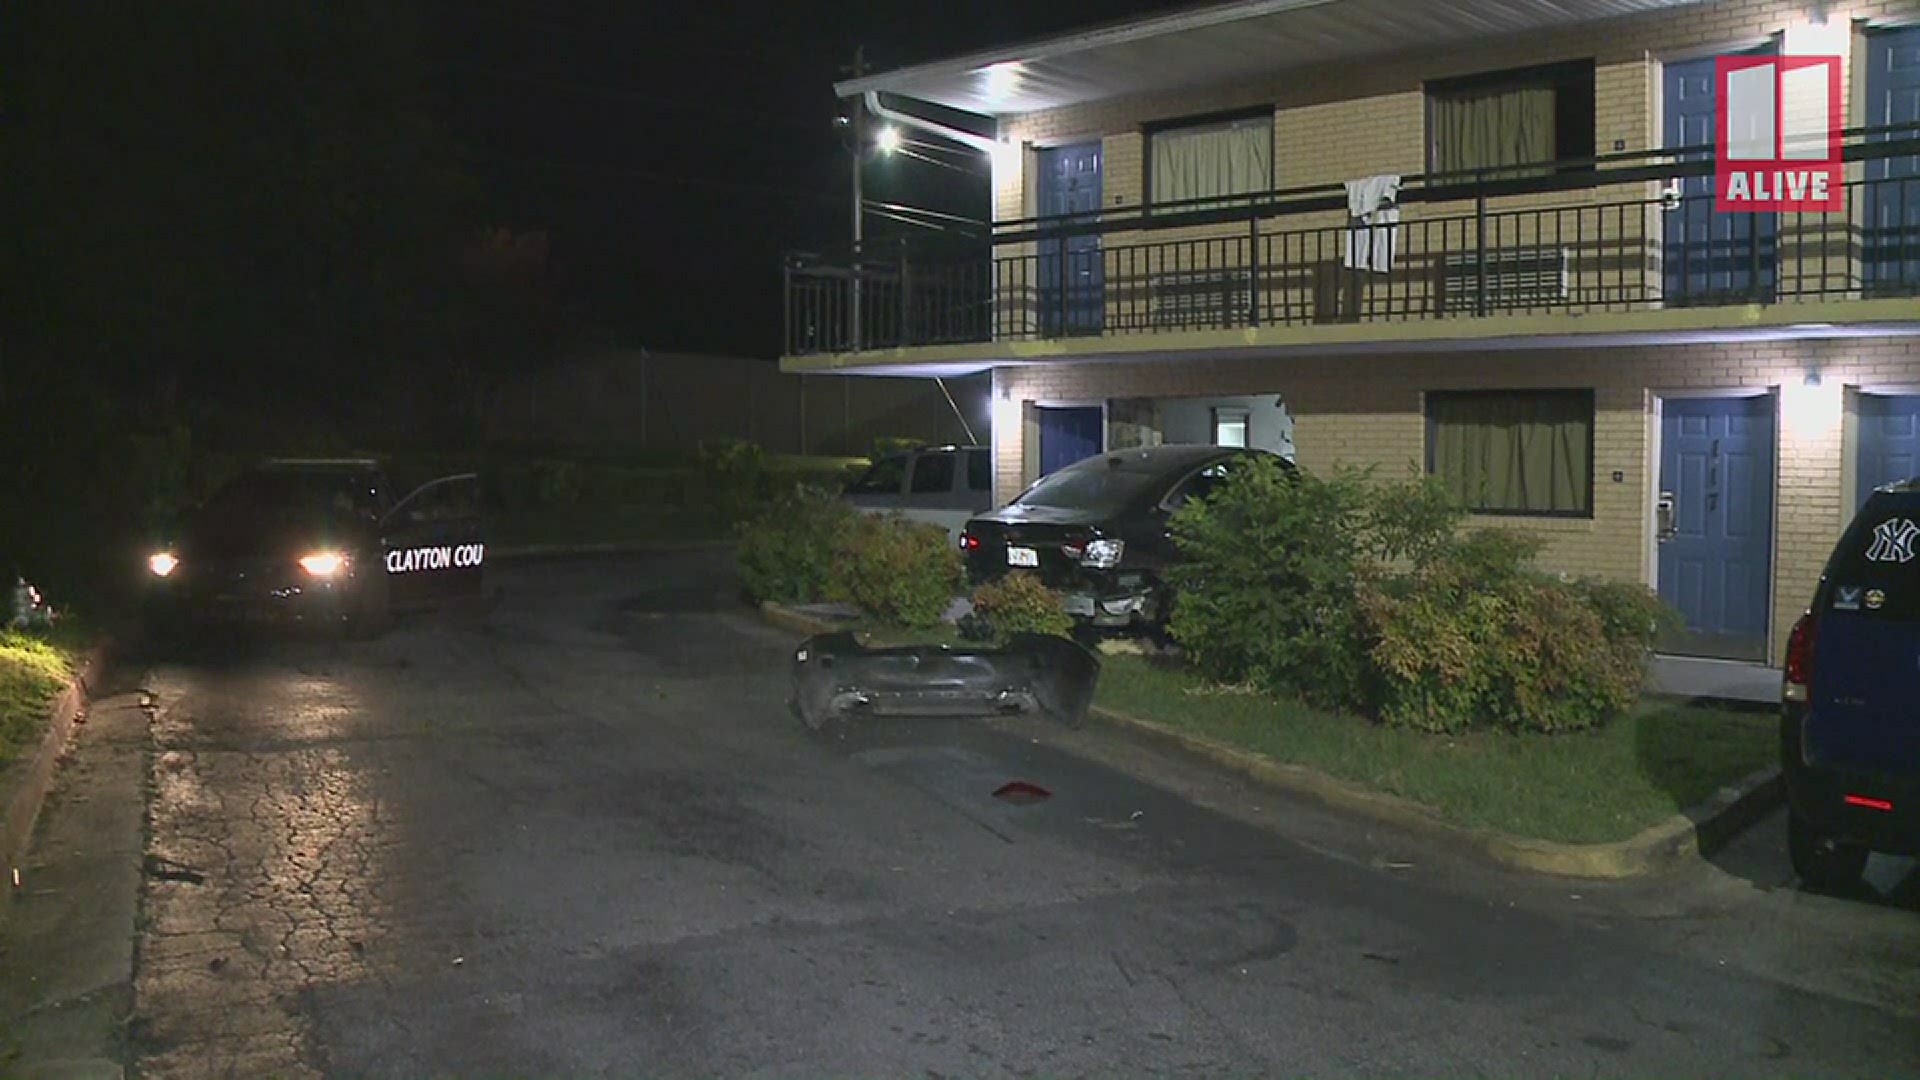 Police are investigating what caused a car to end up inside a motel room on Old Dixie Highway early Saturday morning.